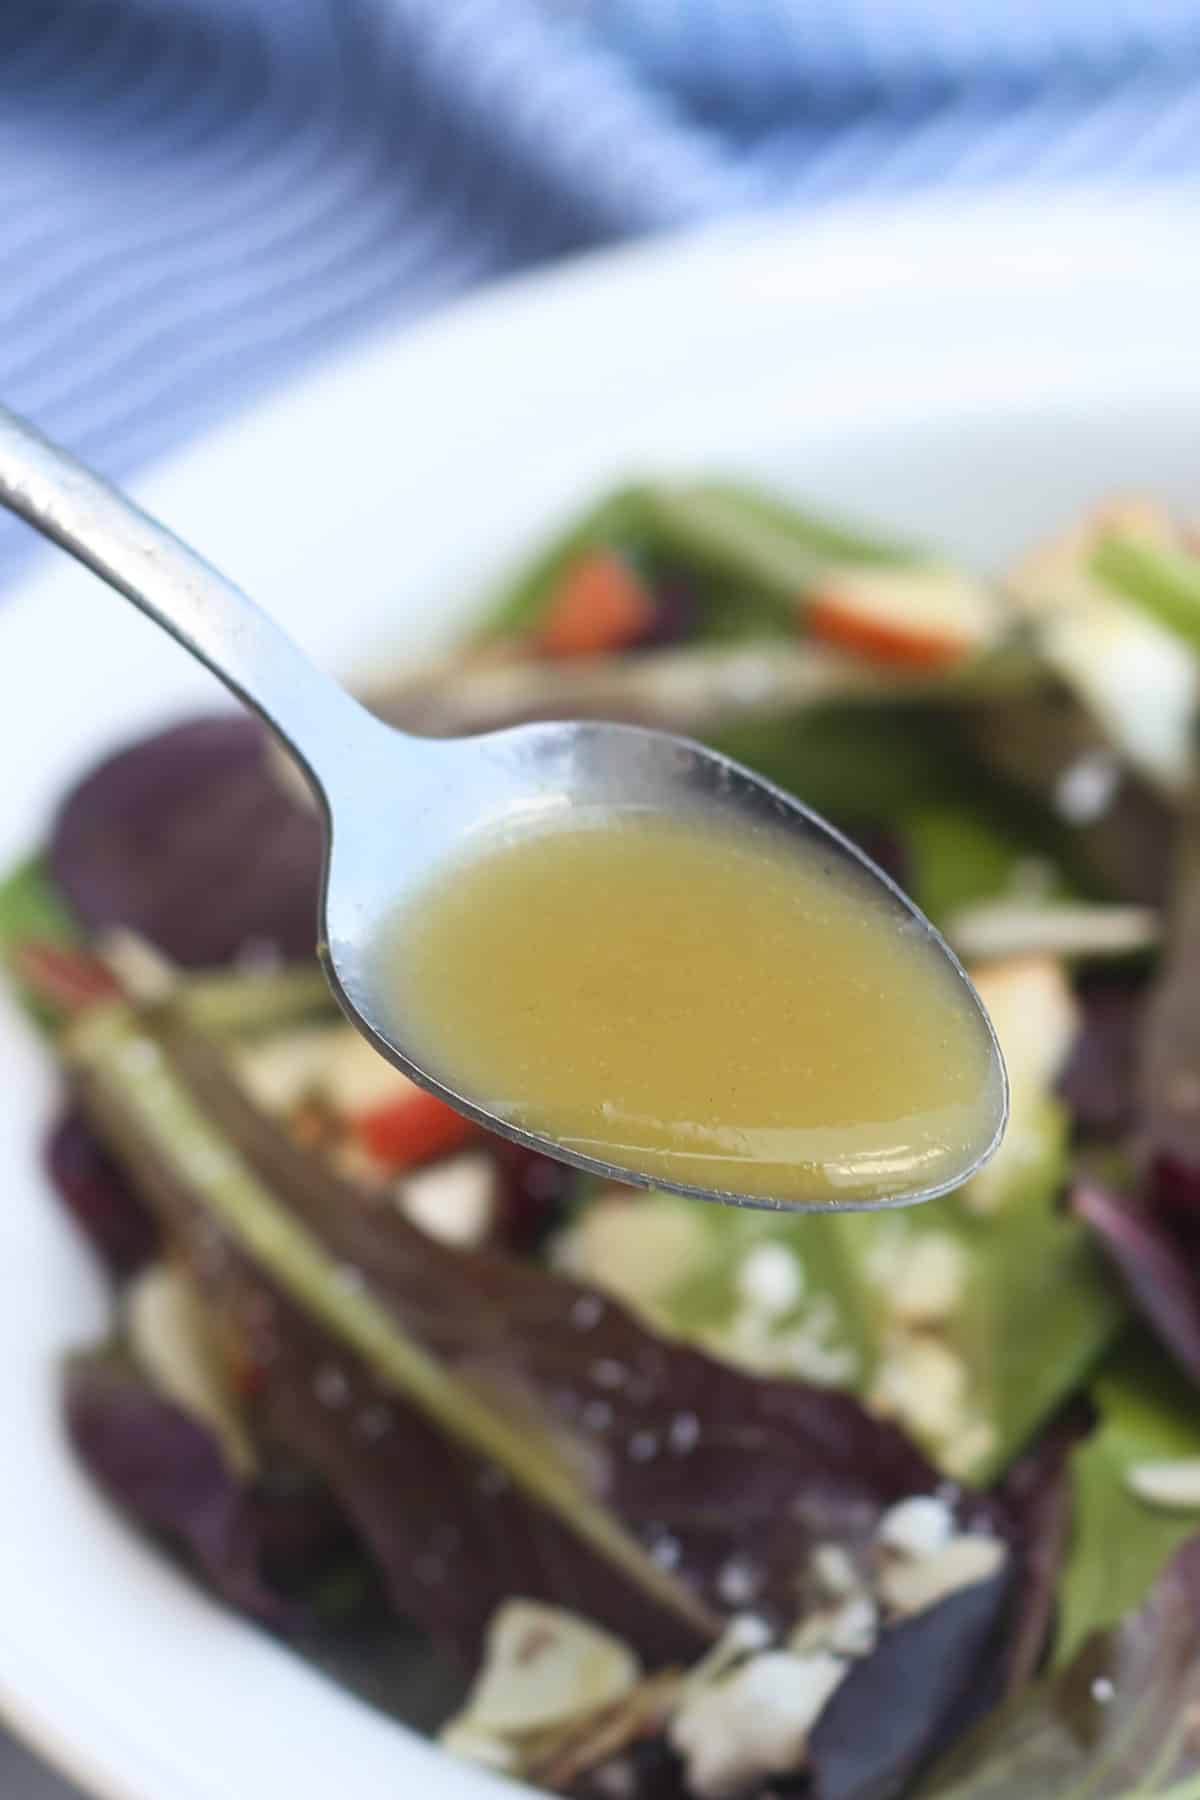 Spoon drizzling honey dijon dressing on top of a red and green leaf salad.